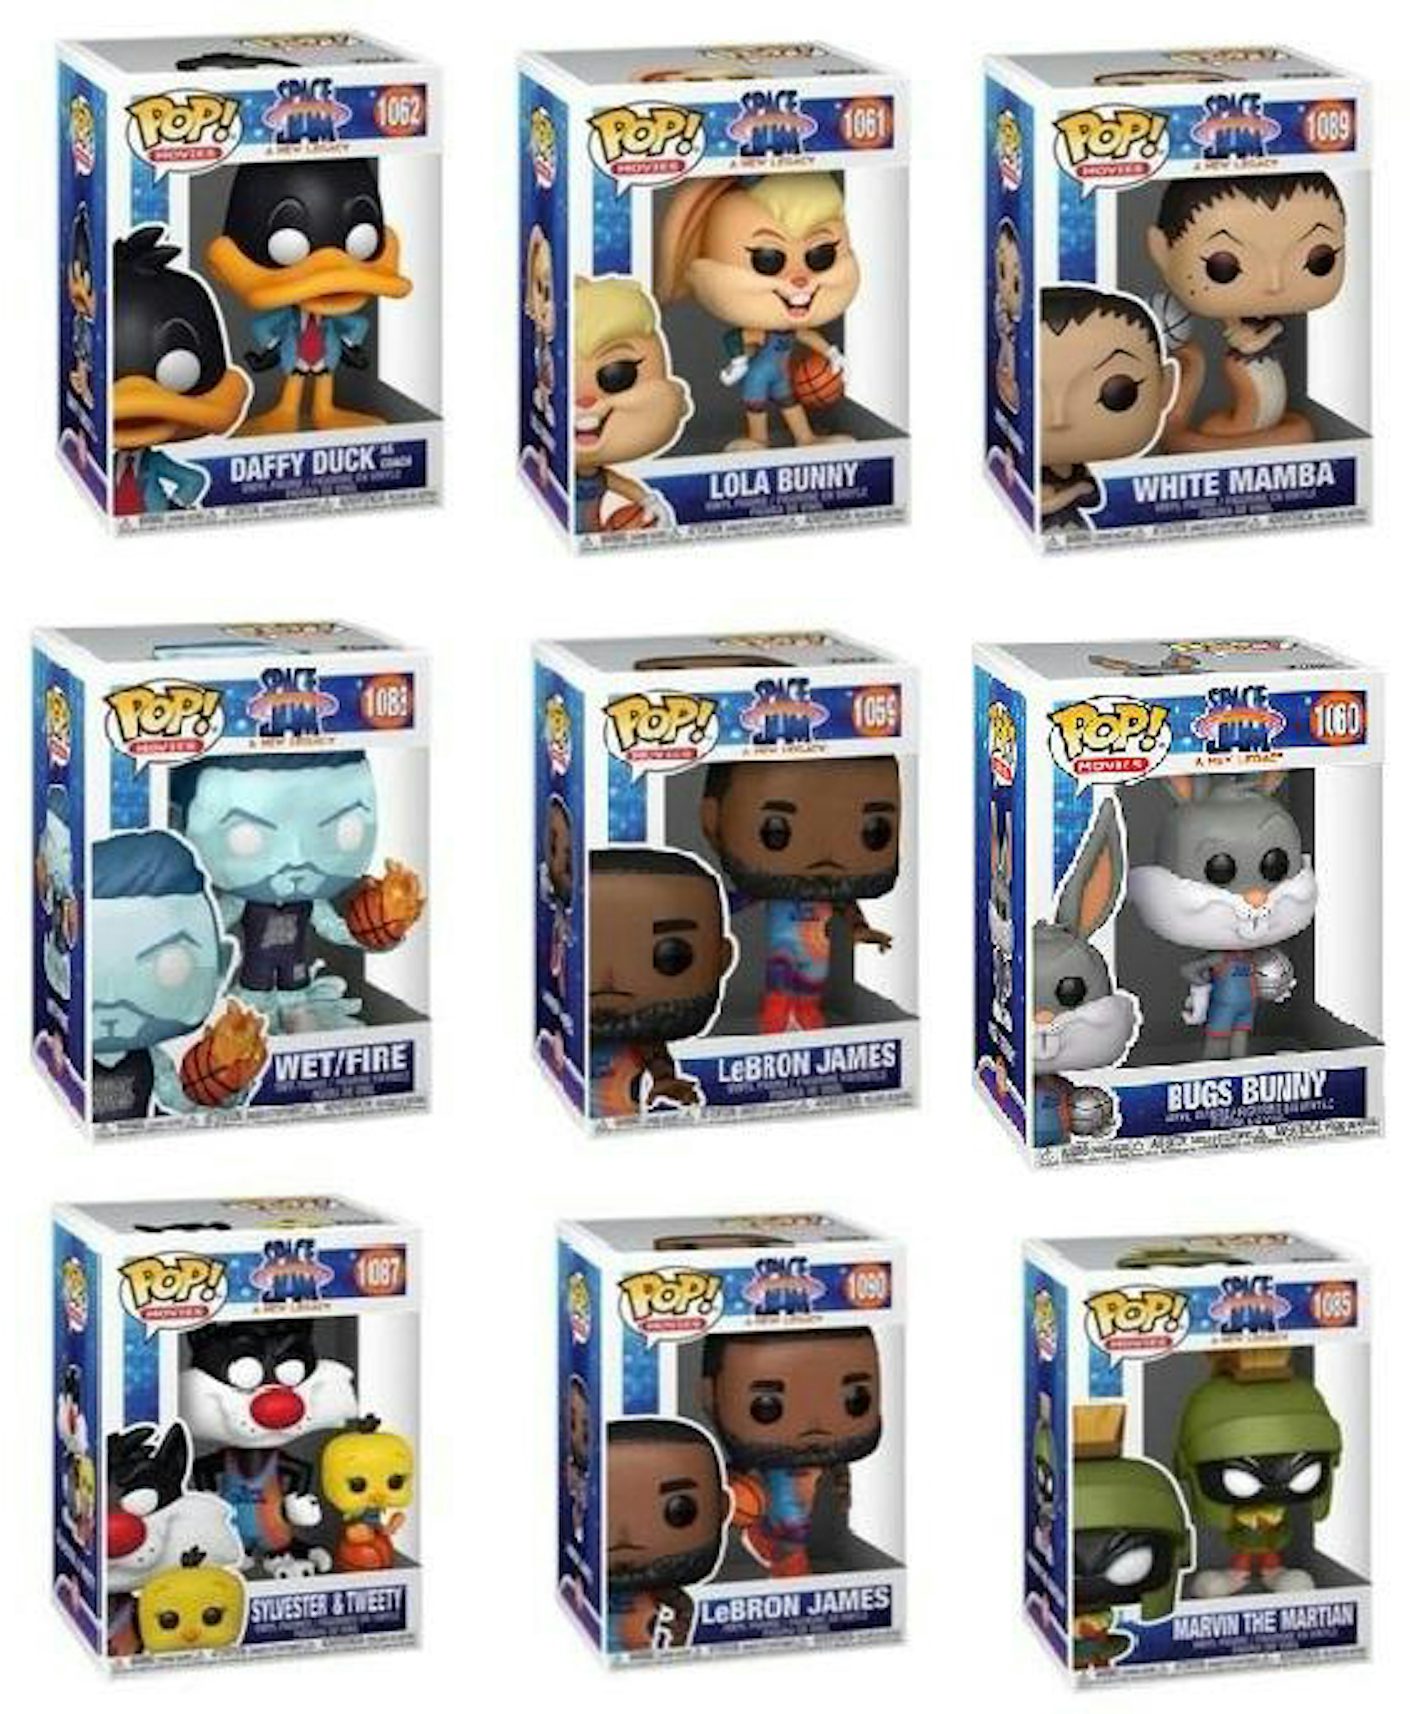 LeBron James Space Jame 2 A New Legacy _Number_1059 Funko Pop!